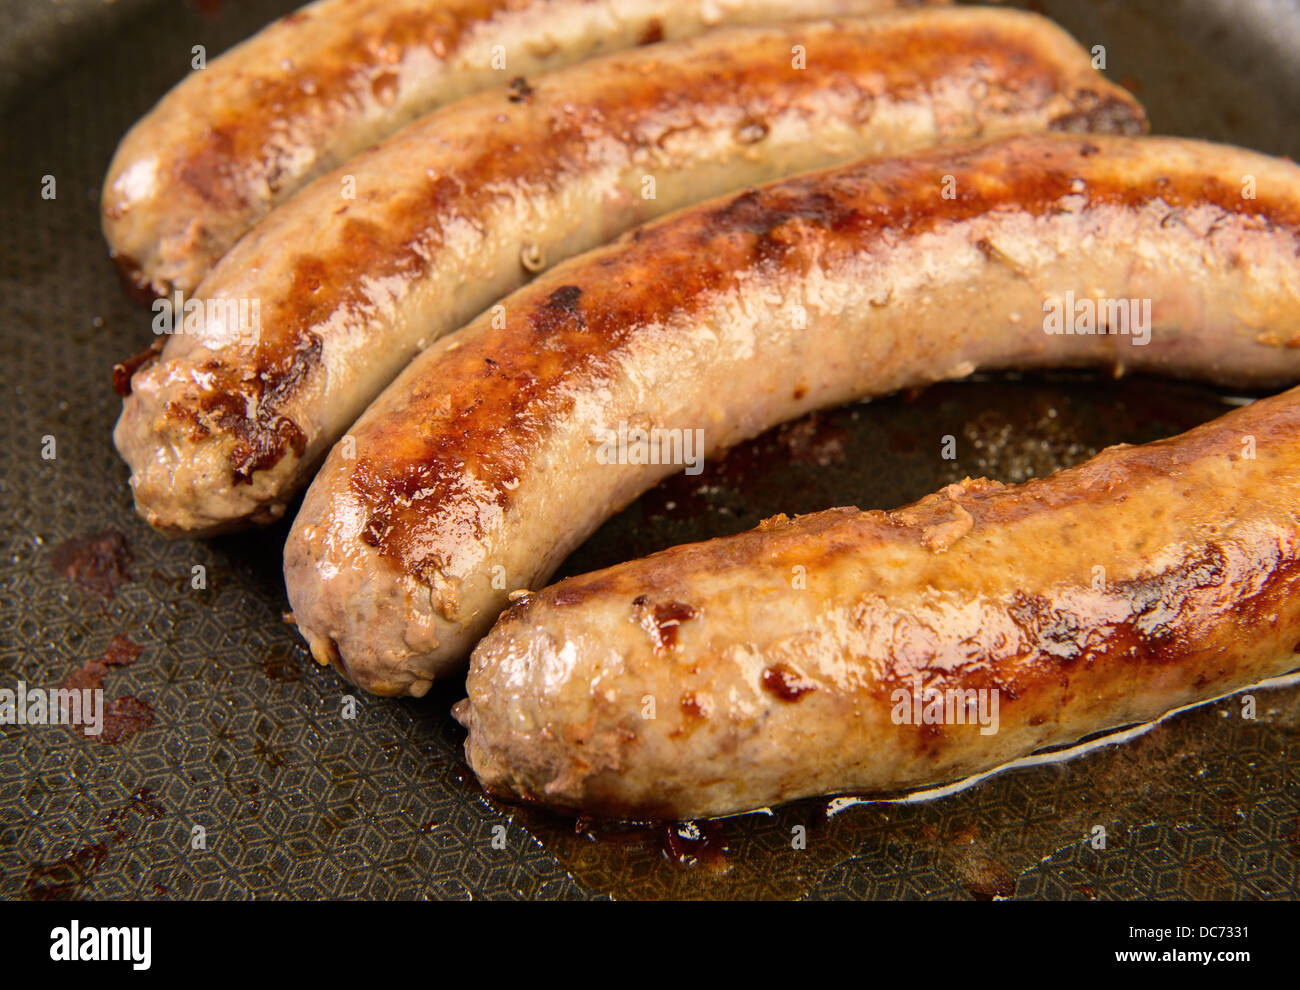 Four beef sausages at frying pan Stock Photo